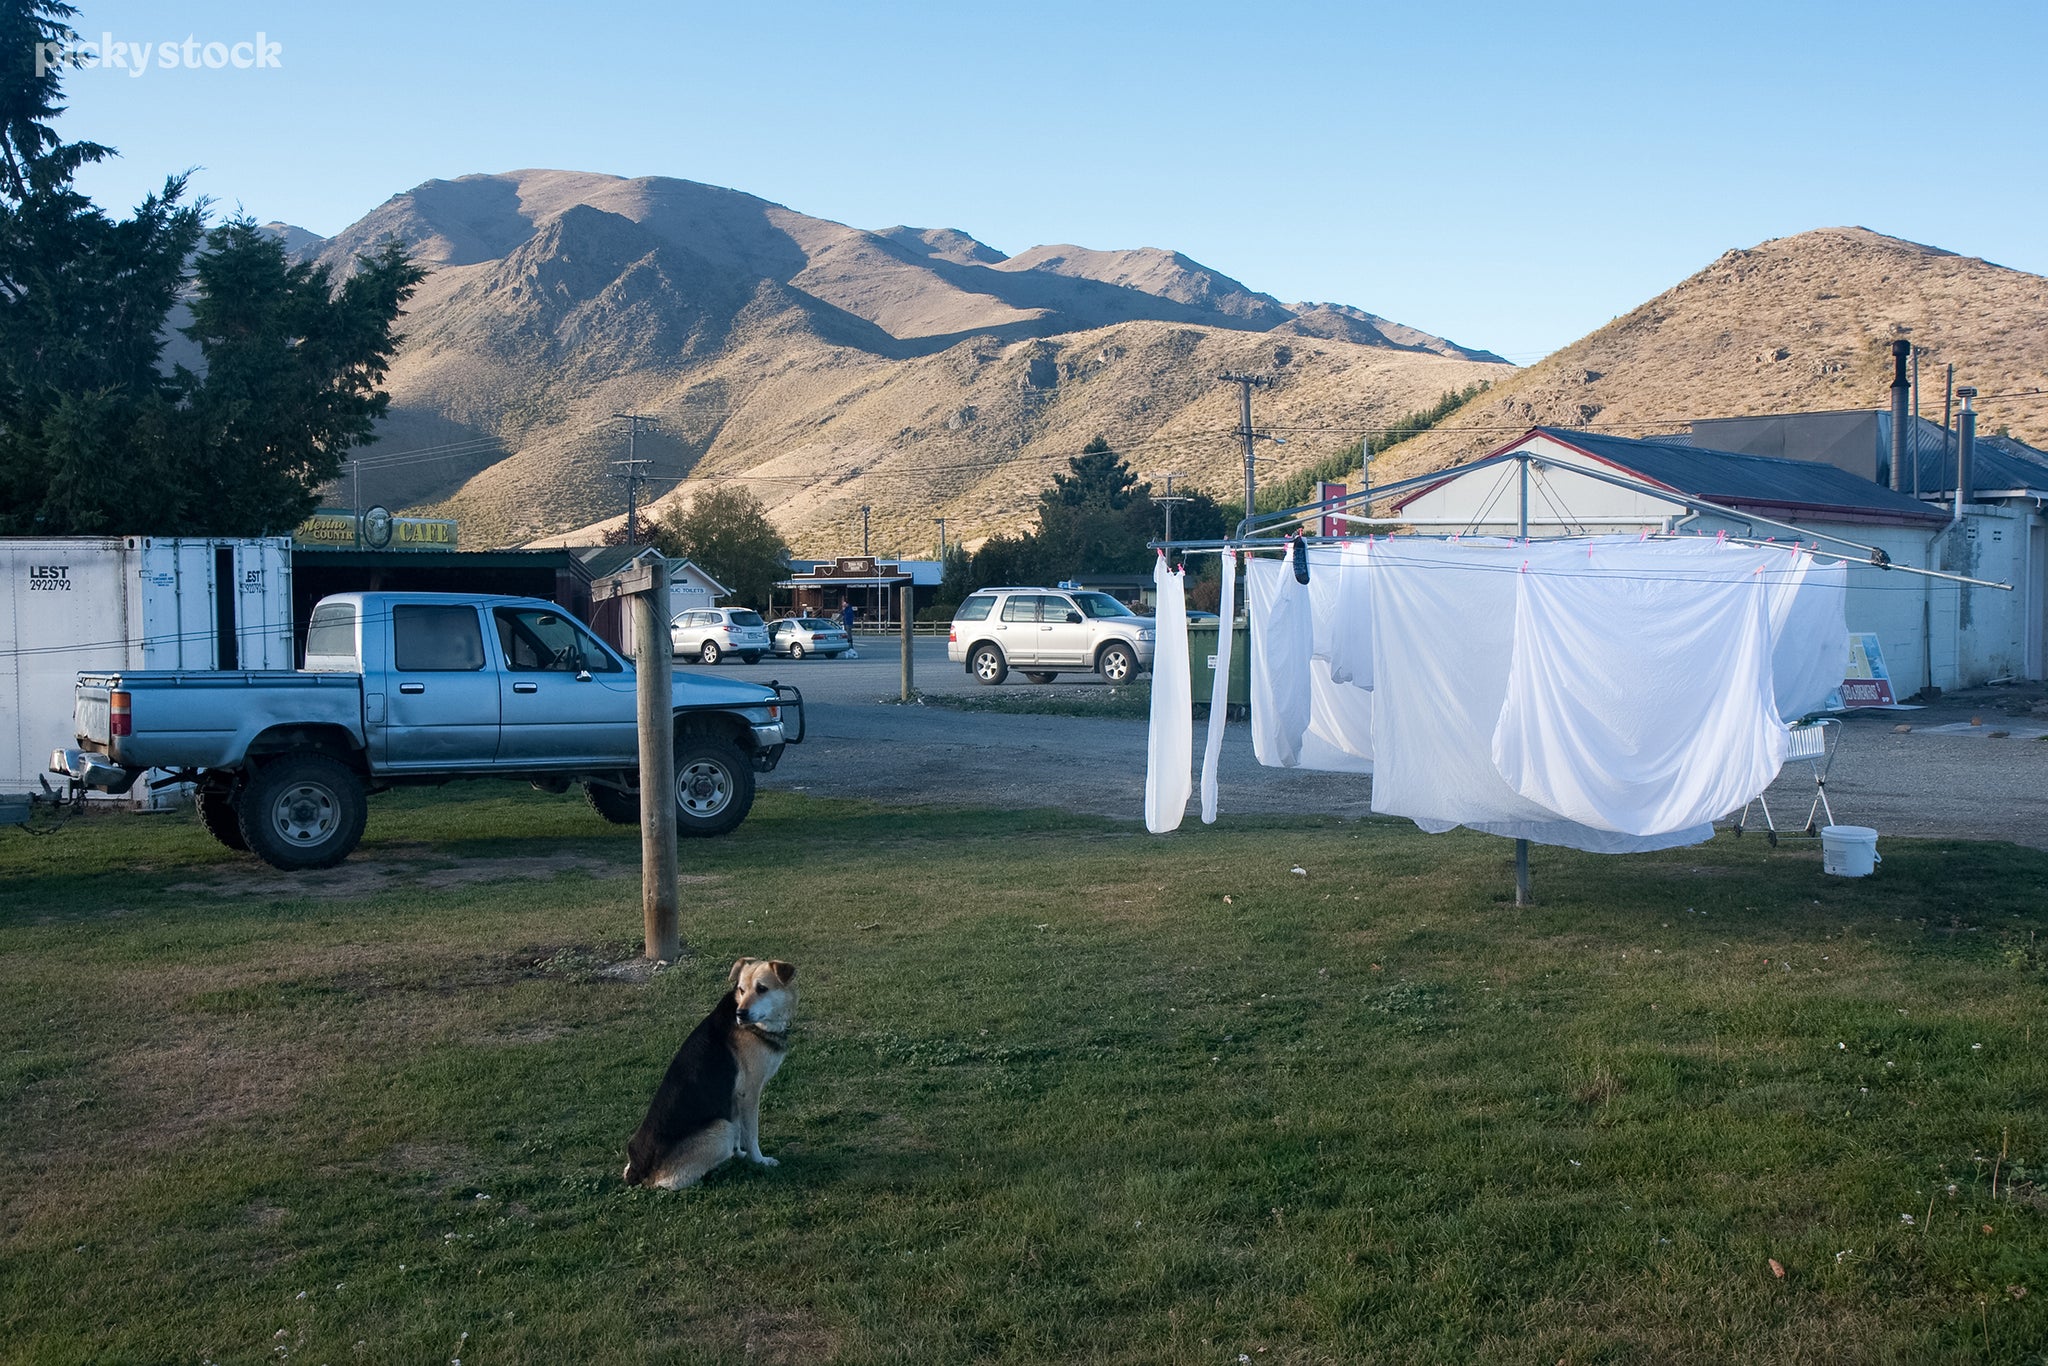 A landscape of a small cluster of buildings in between green hills. A medium-sized dog sits patiently next to a blue four-wheel ute while white linens dry outside a travelers motel.